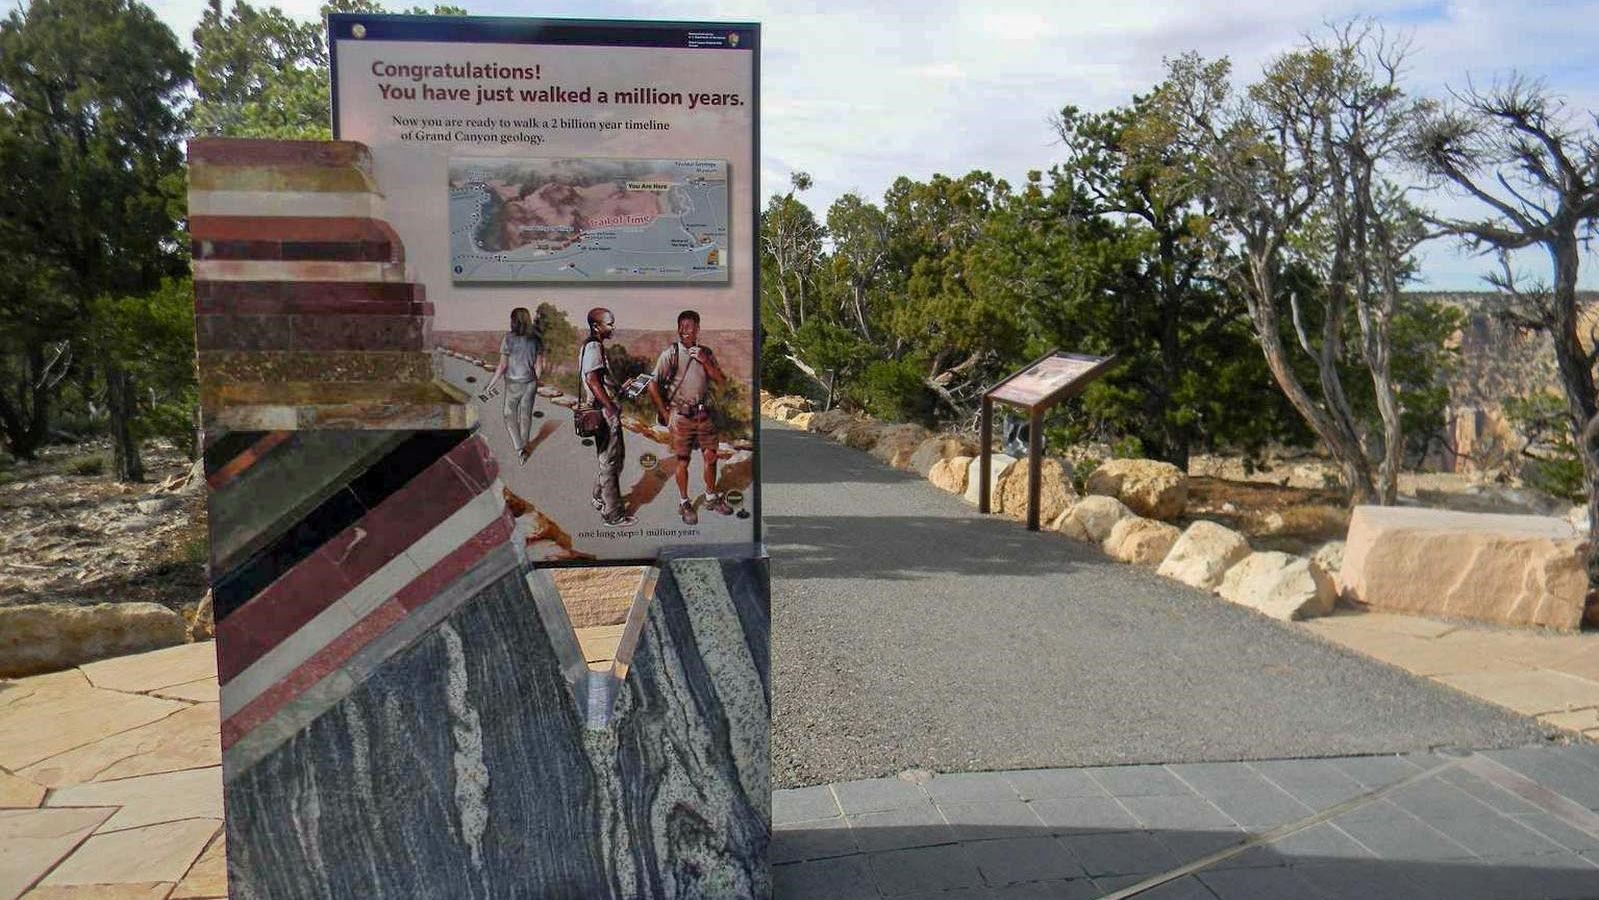 By a paved footpath, a stone monolith portal sign displays colorful geologic rock layers.